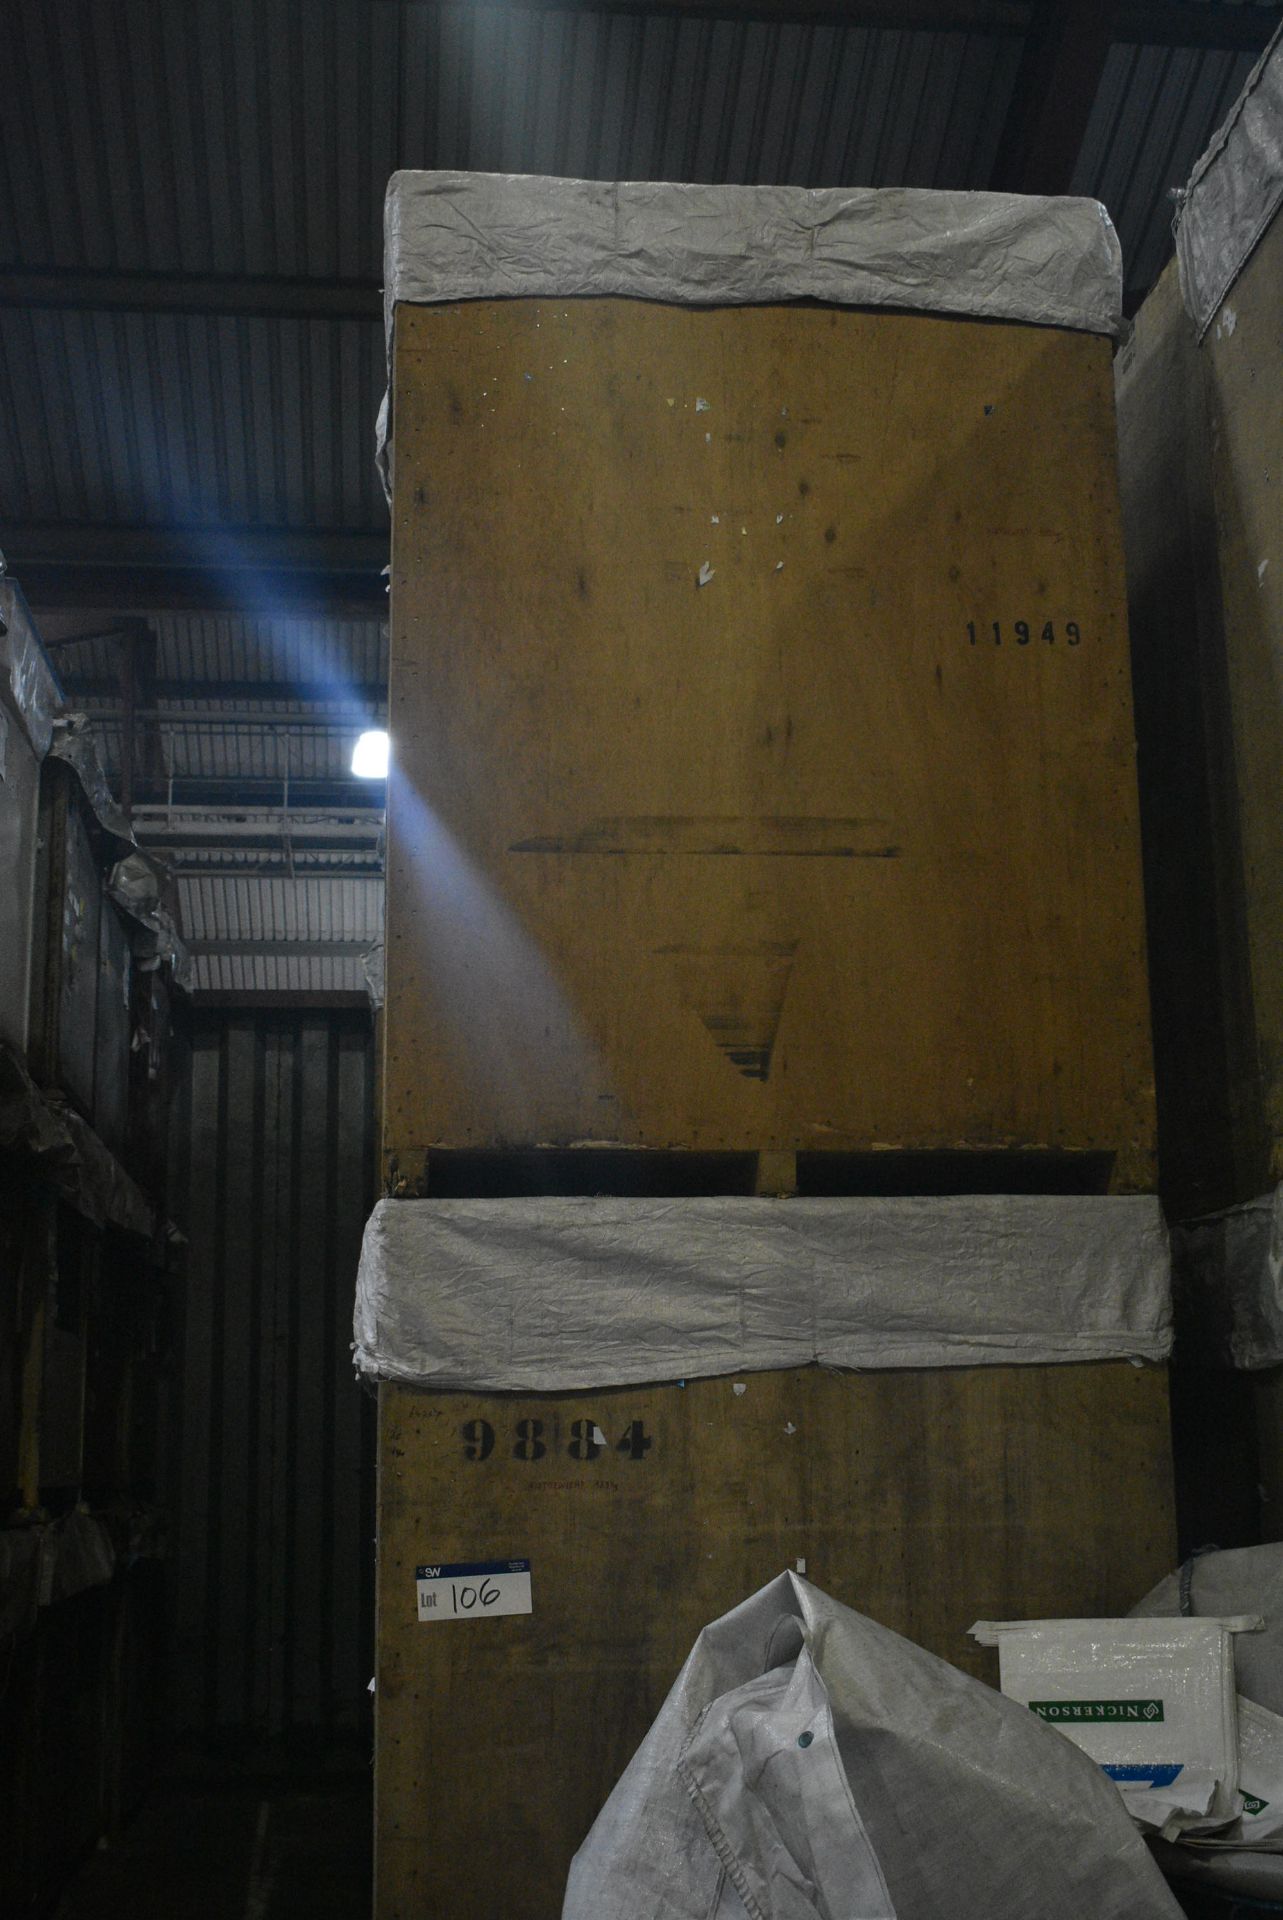 14 Timber Tote / Product Holding Boxes, each approx. 1.52m x 1.15m x 2.07m deep overall, with covers - Image 2 of 2